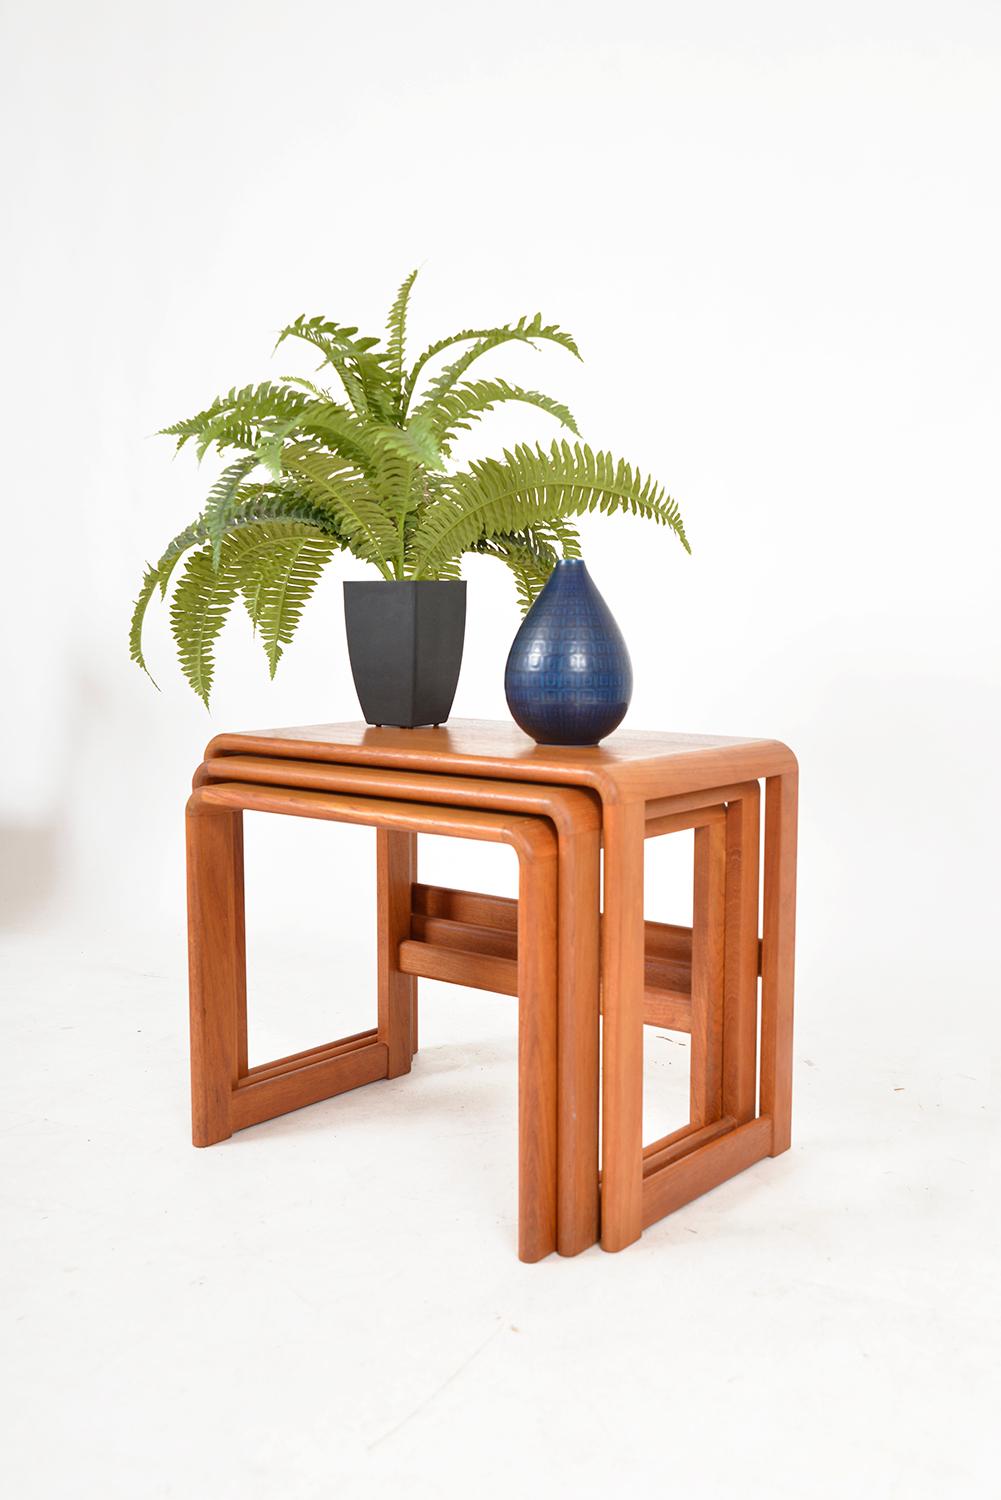 Midcentury Teak Nesting Occasional Tables by O'Donnell Design Irish 1970s Danish For Sale 3